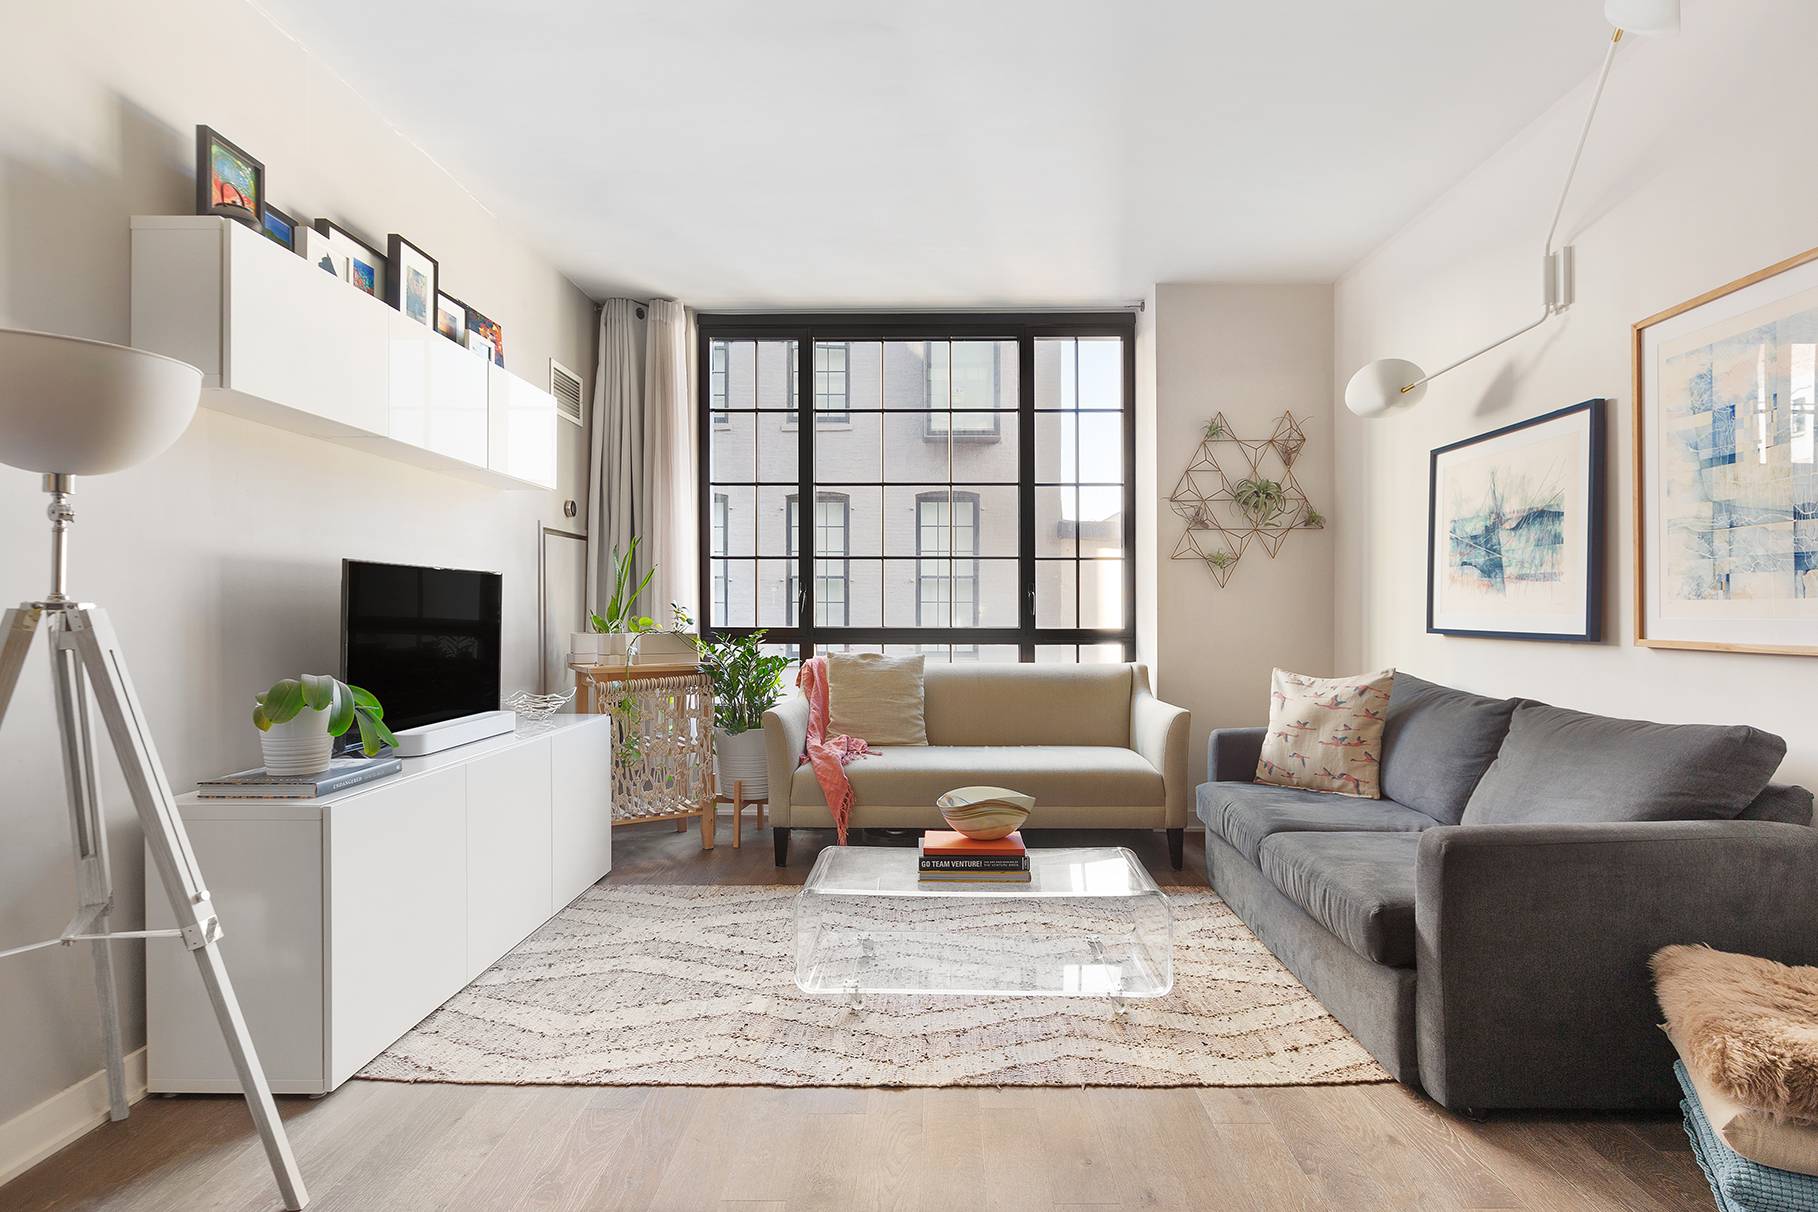 AVAILABLE FURNISHED AND UNFURNISHED Ideally located on a cobblestone street in the heart of Dumbo is 205 Water Street.